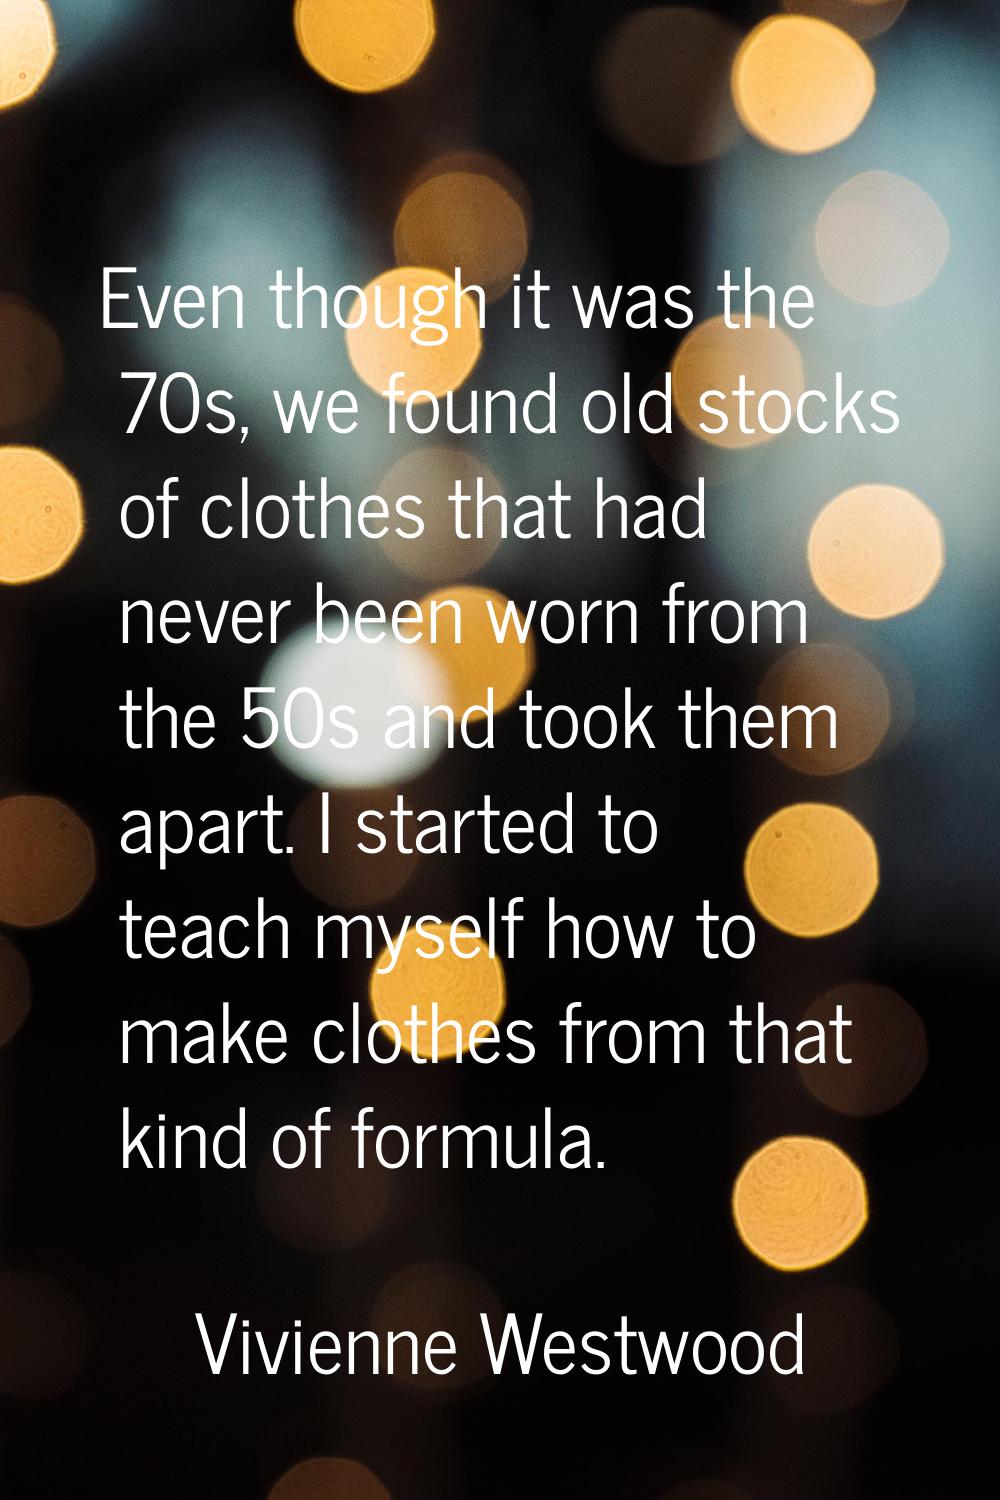 Even though it was the 70s, we found old stocks of clothes that had never been worn from the 50s an